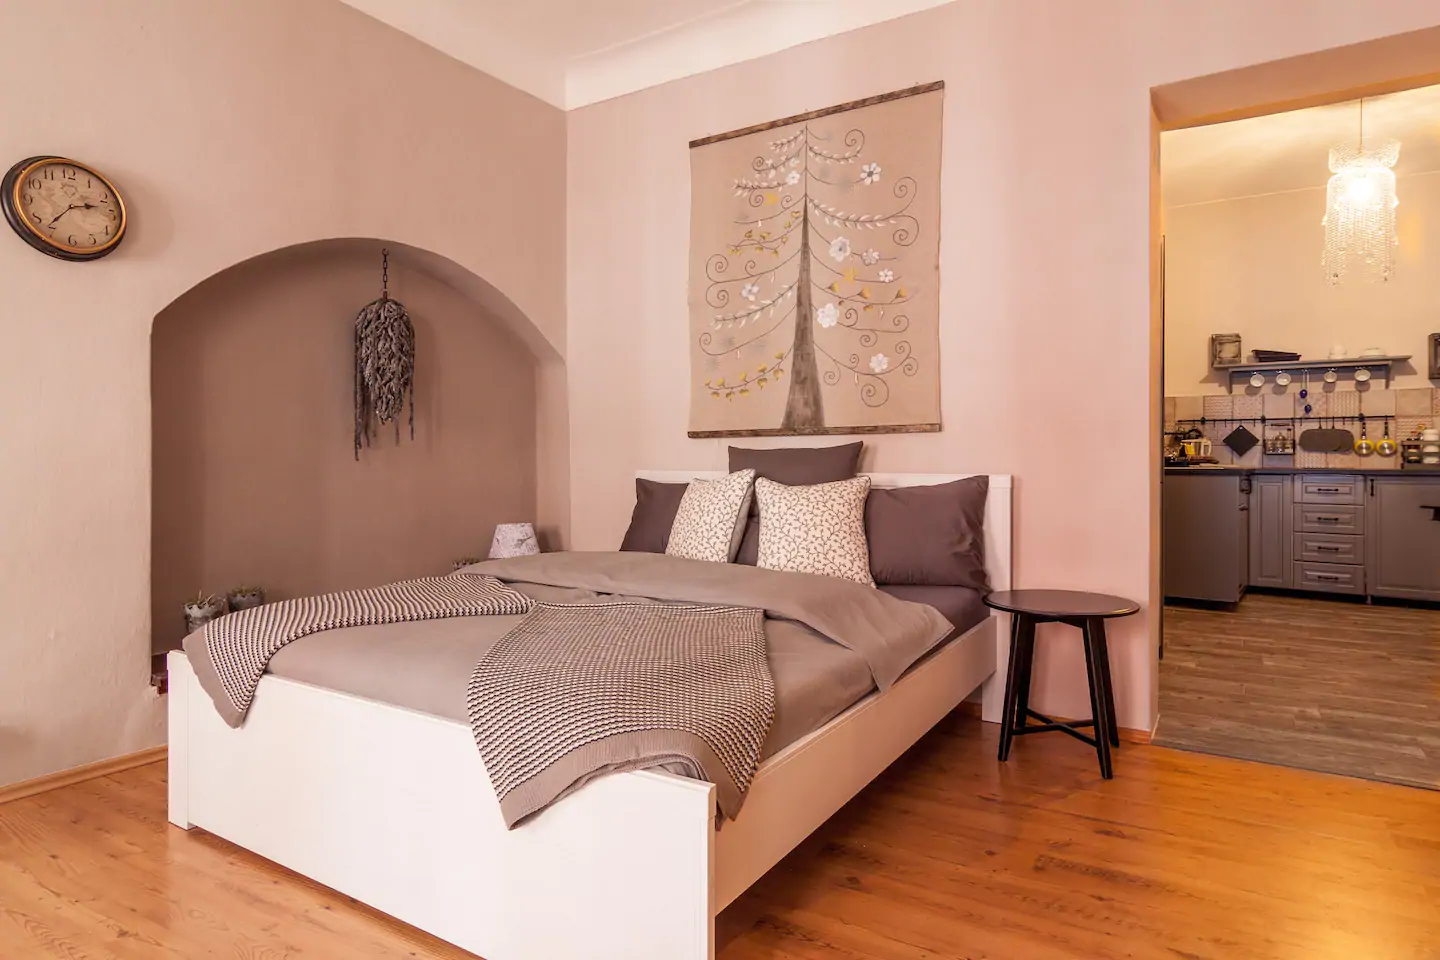 Comfortable bed with grey bedding. Above the bed is artwork of a tree.